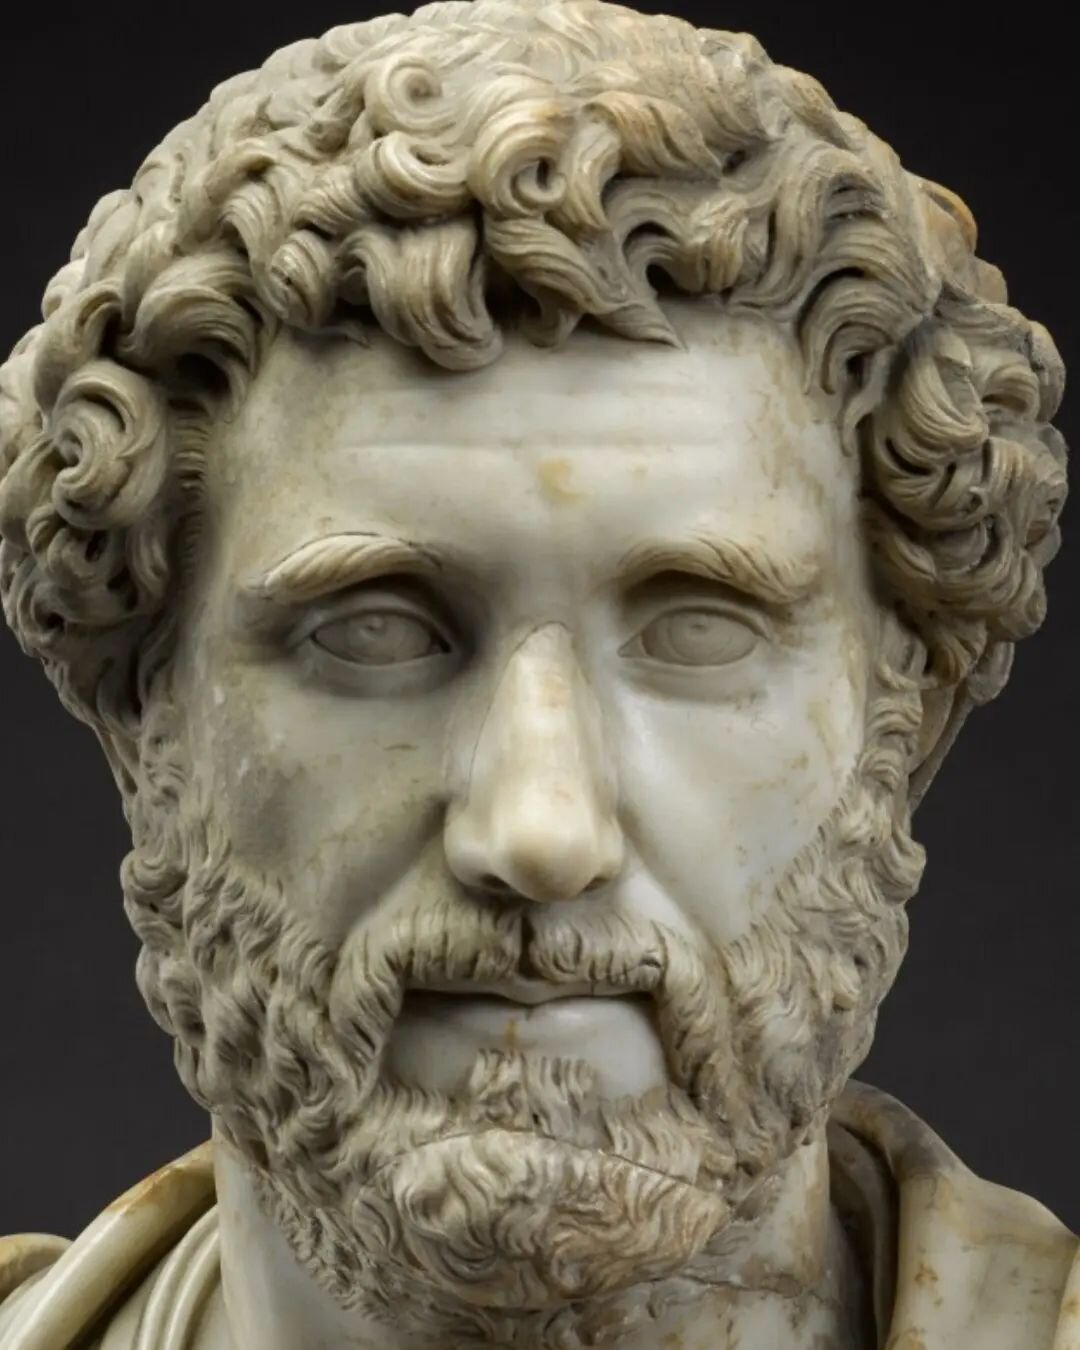 A lovely bust of Emperor Antoninus Pius coming up at auction shortly.